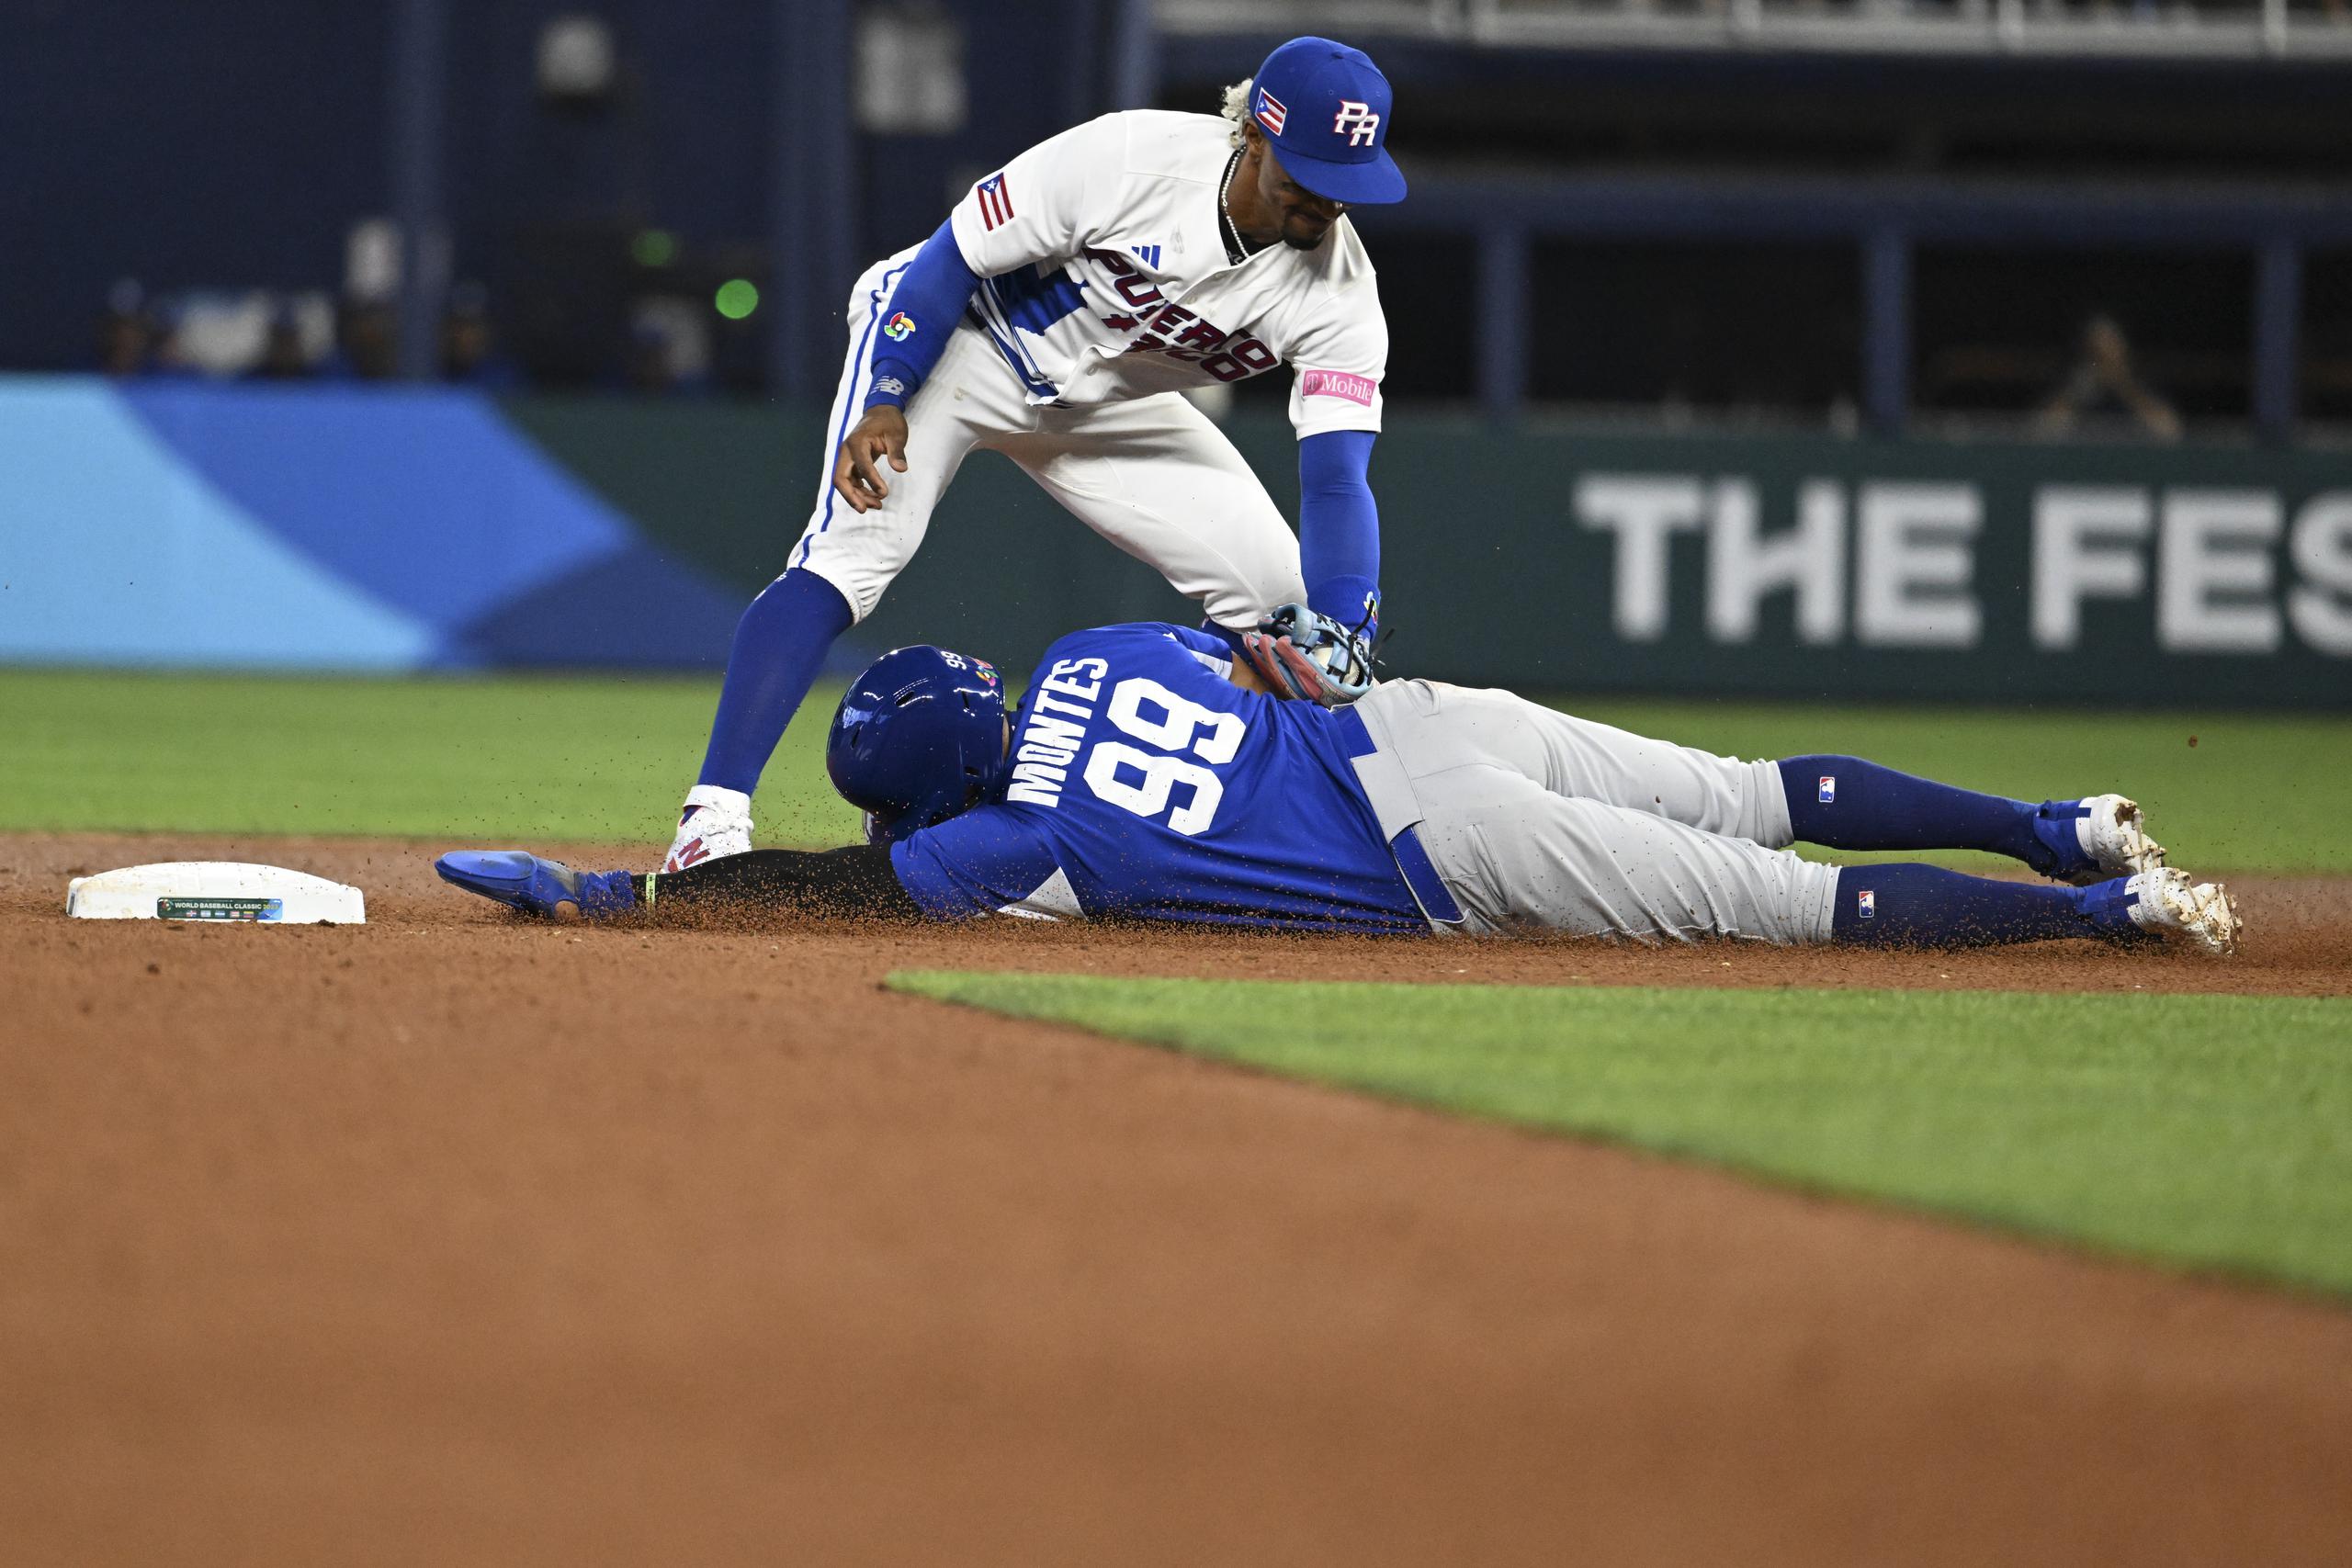 Maldonado also showed his arm in the first round by taking out Nicaraguan player Juan Montes on this play with Lindor out. 